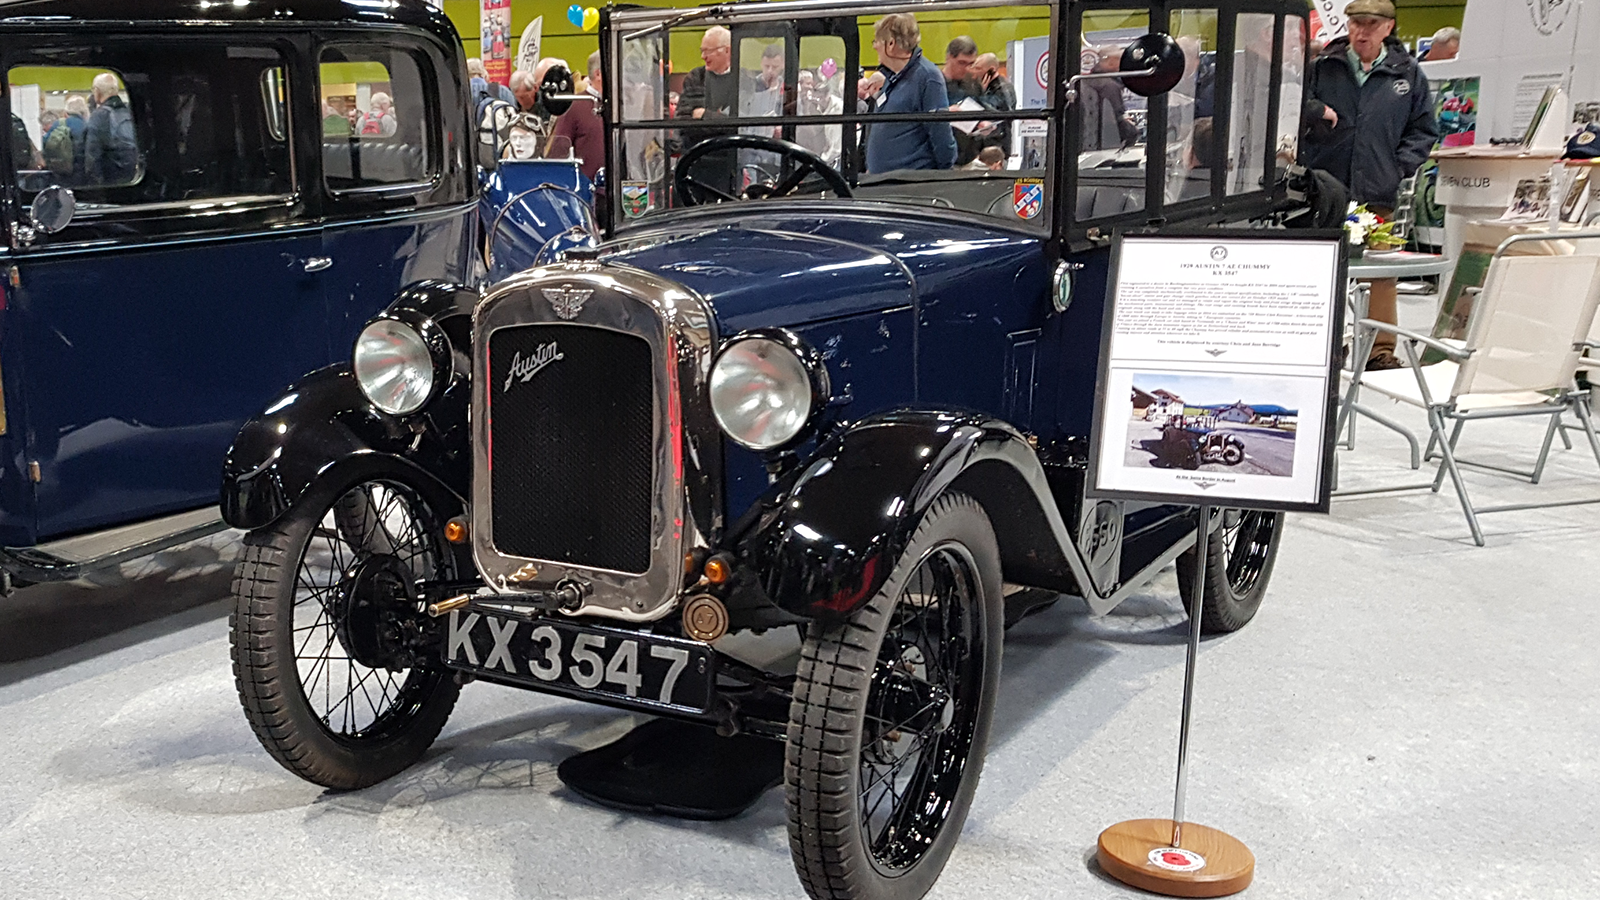 Our 18 favourite cars from the NEC Classic Motor Show 2019